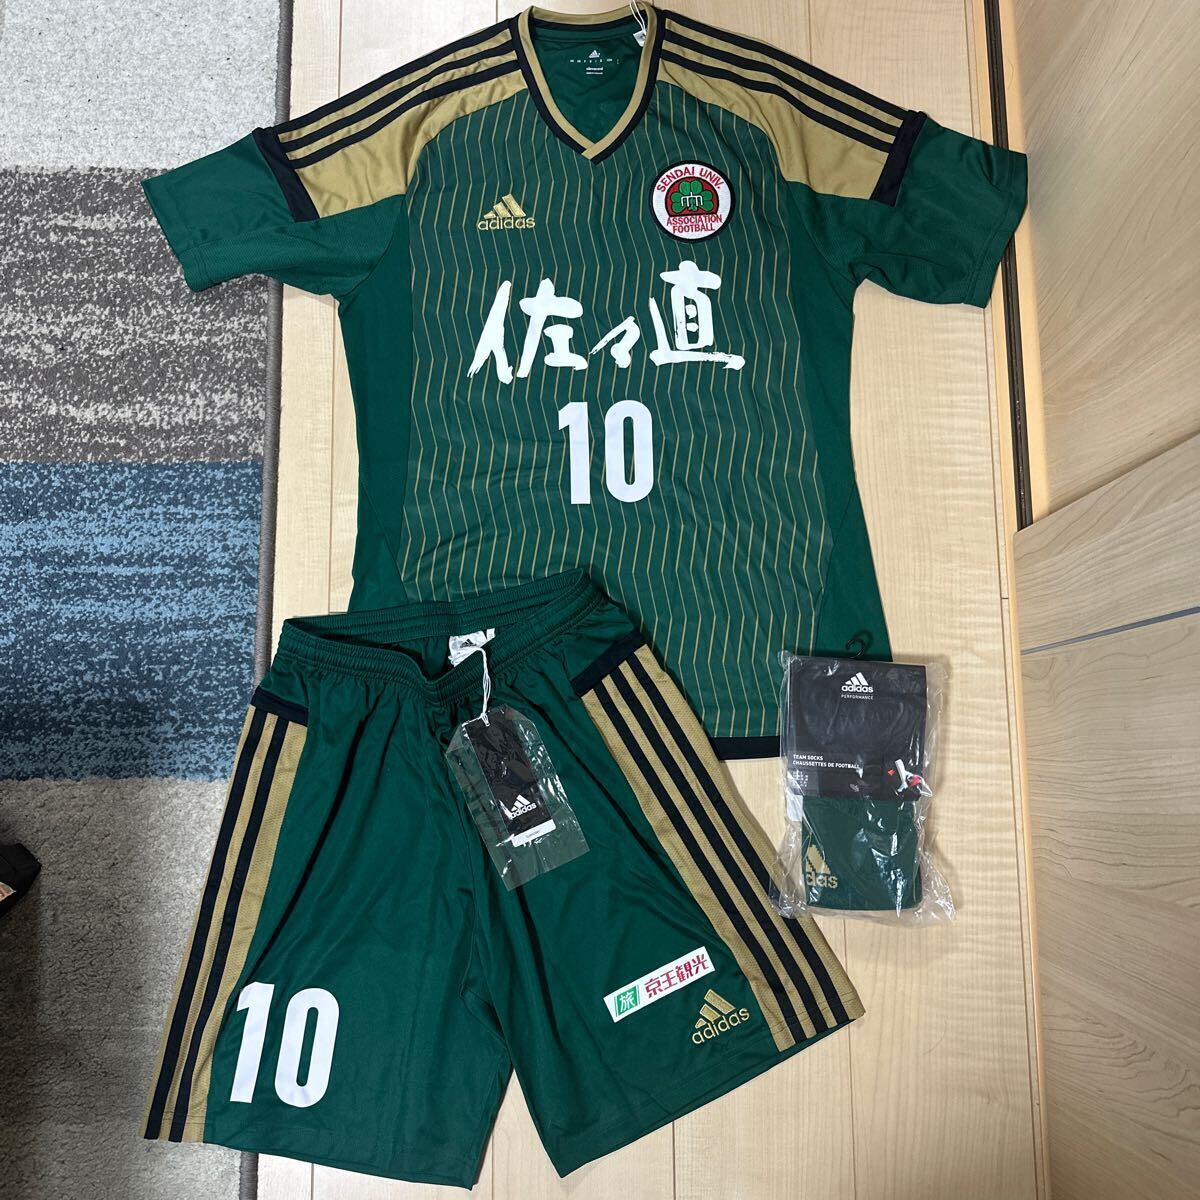  new goods sendai university mountain rice field full Hara 2017 supplied goods 3 point set actual use not for sale uniform as Lucra ro Numazu Matsumoto mountain .. side FC J Lee g top and bottom set 